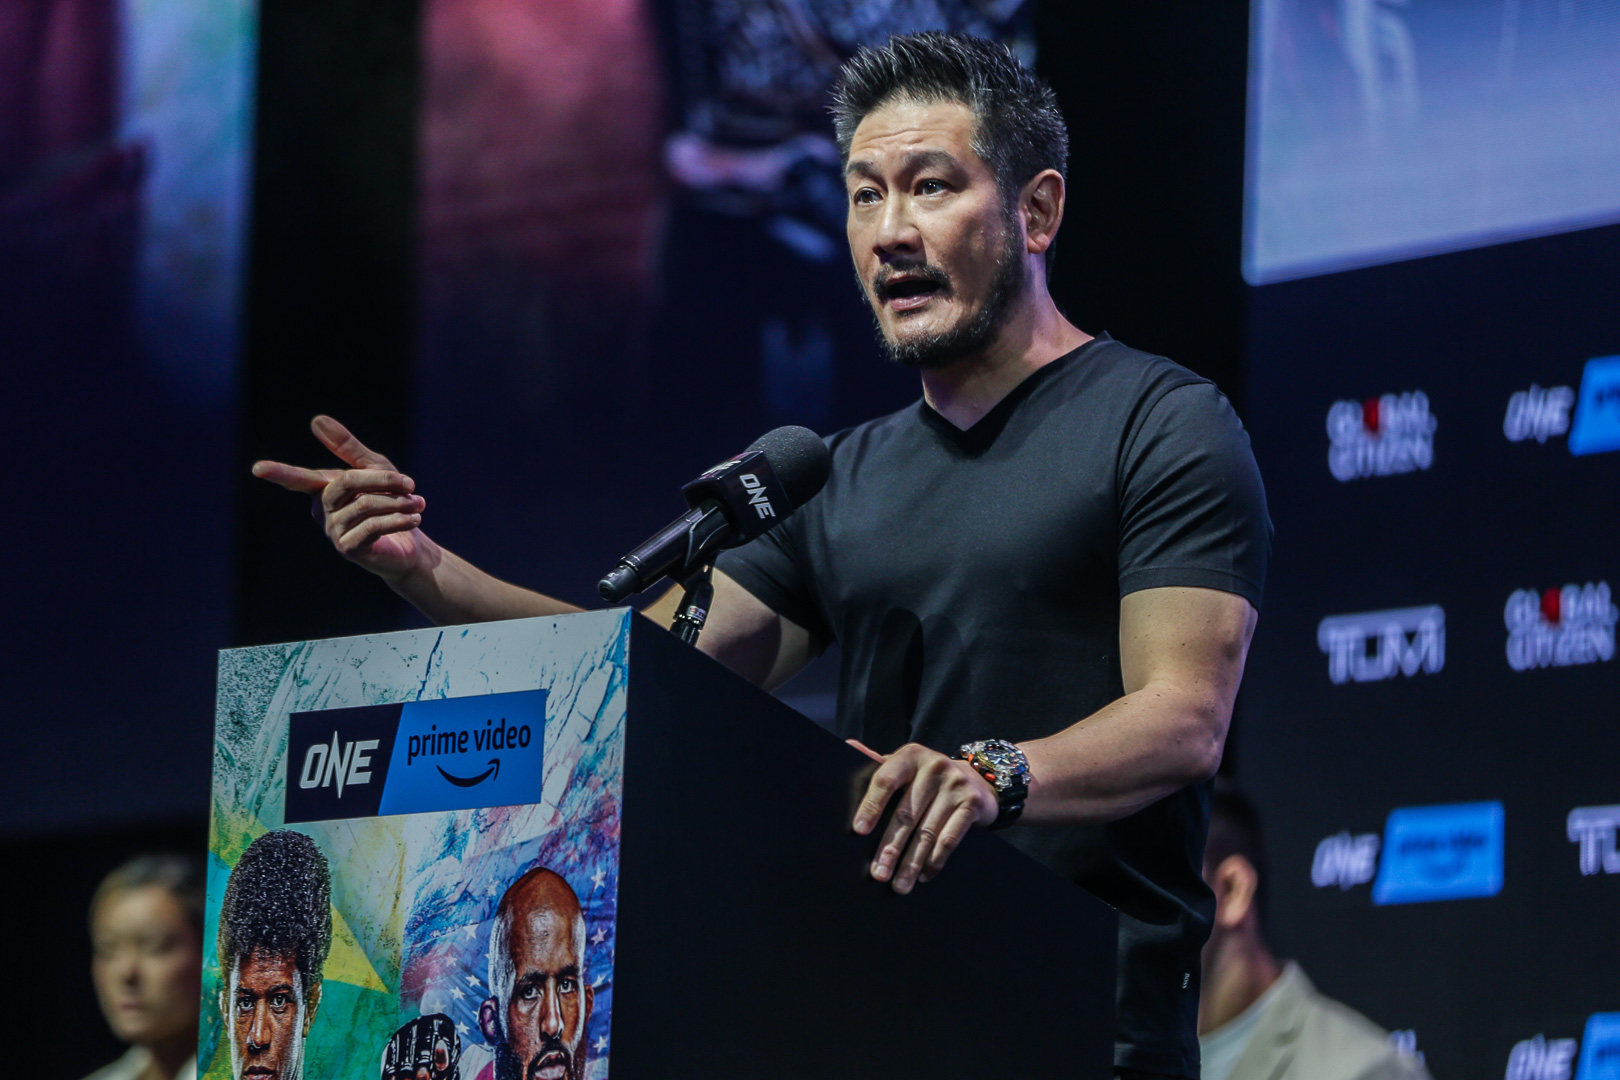 ONE Championship CEO and founder Chatri Sityodtong at the ONE on Prime Video 1 press conference in Singapore. Photos: ONE Championship